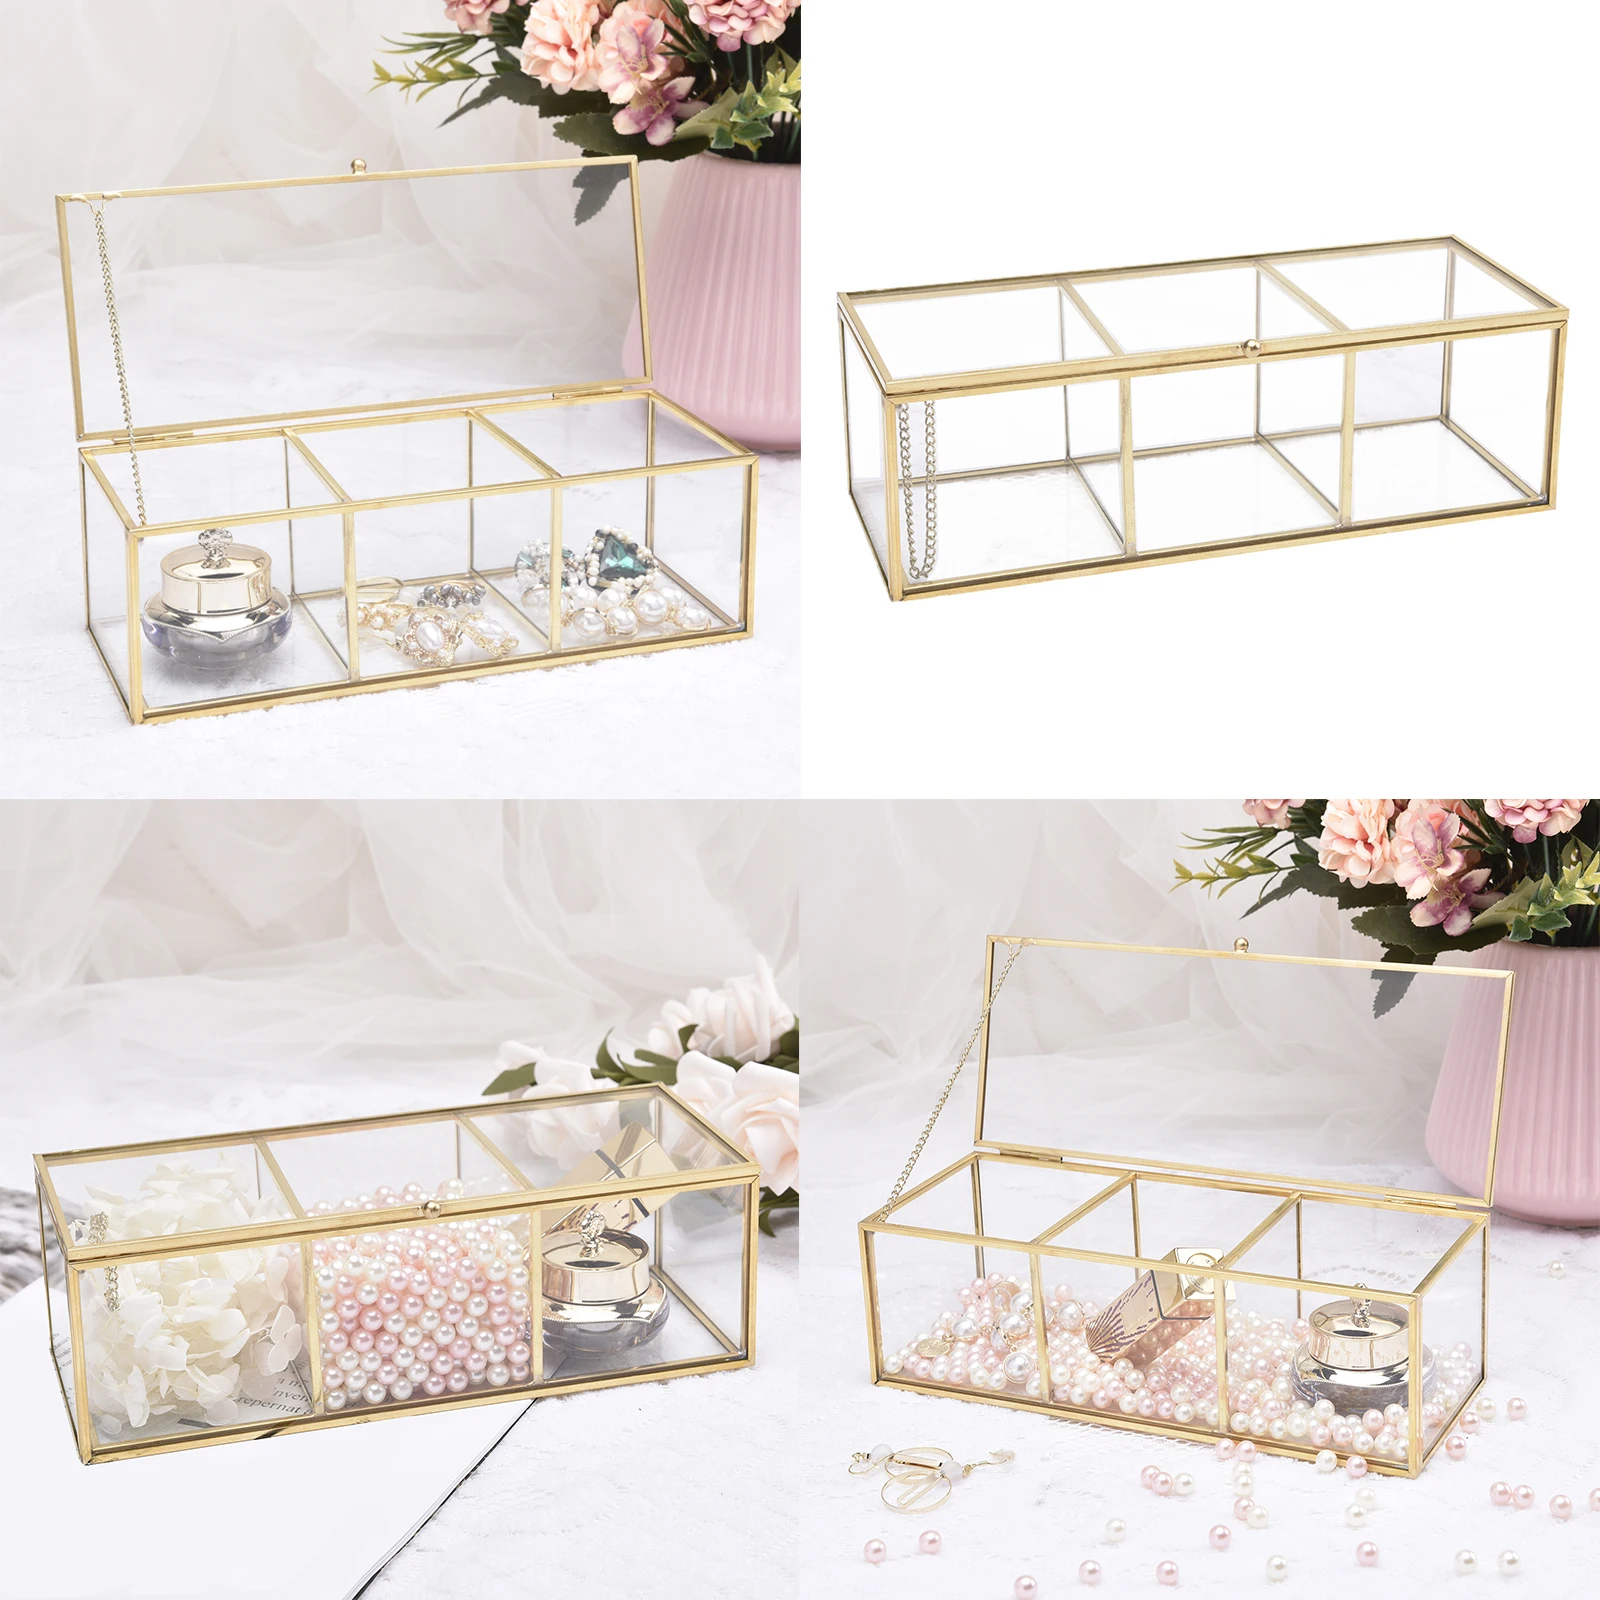 Glass Rectangle Decorative Mirror Tray Hold Perfume, Jewelry, Cosmetics, Makeup, Trinket and , Glass Case for Dresser